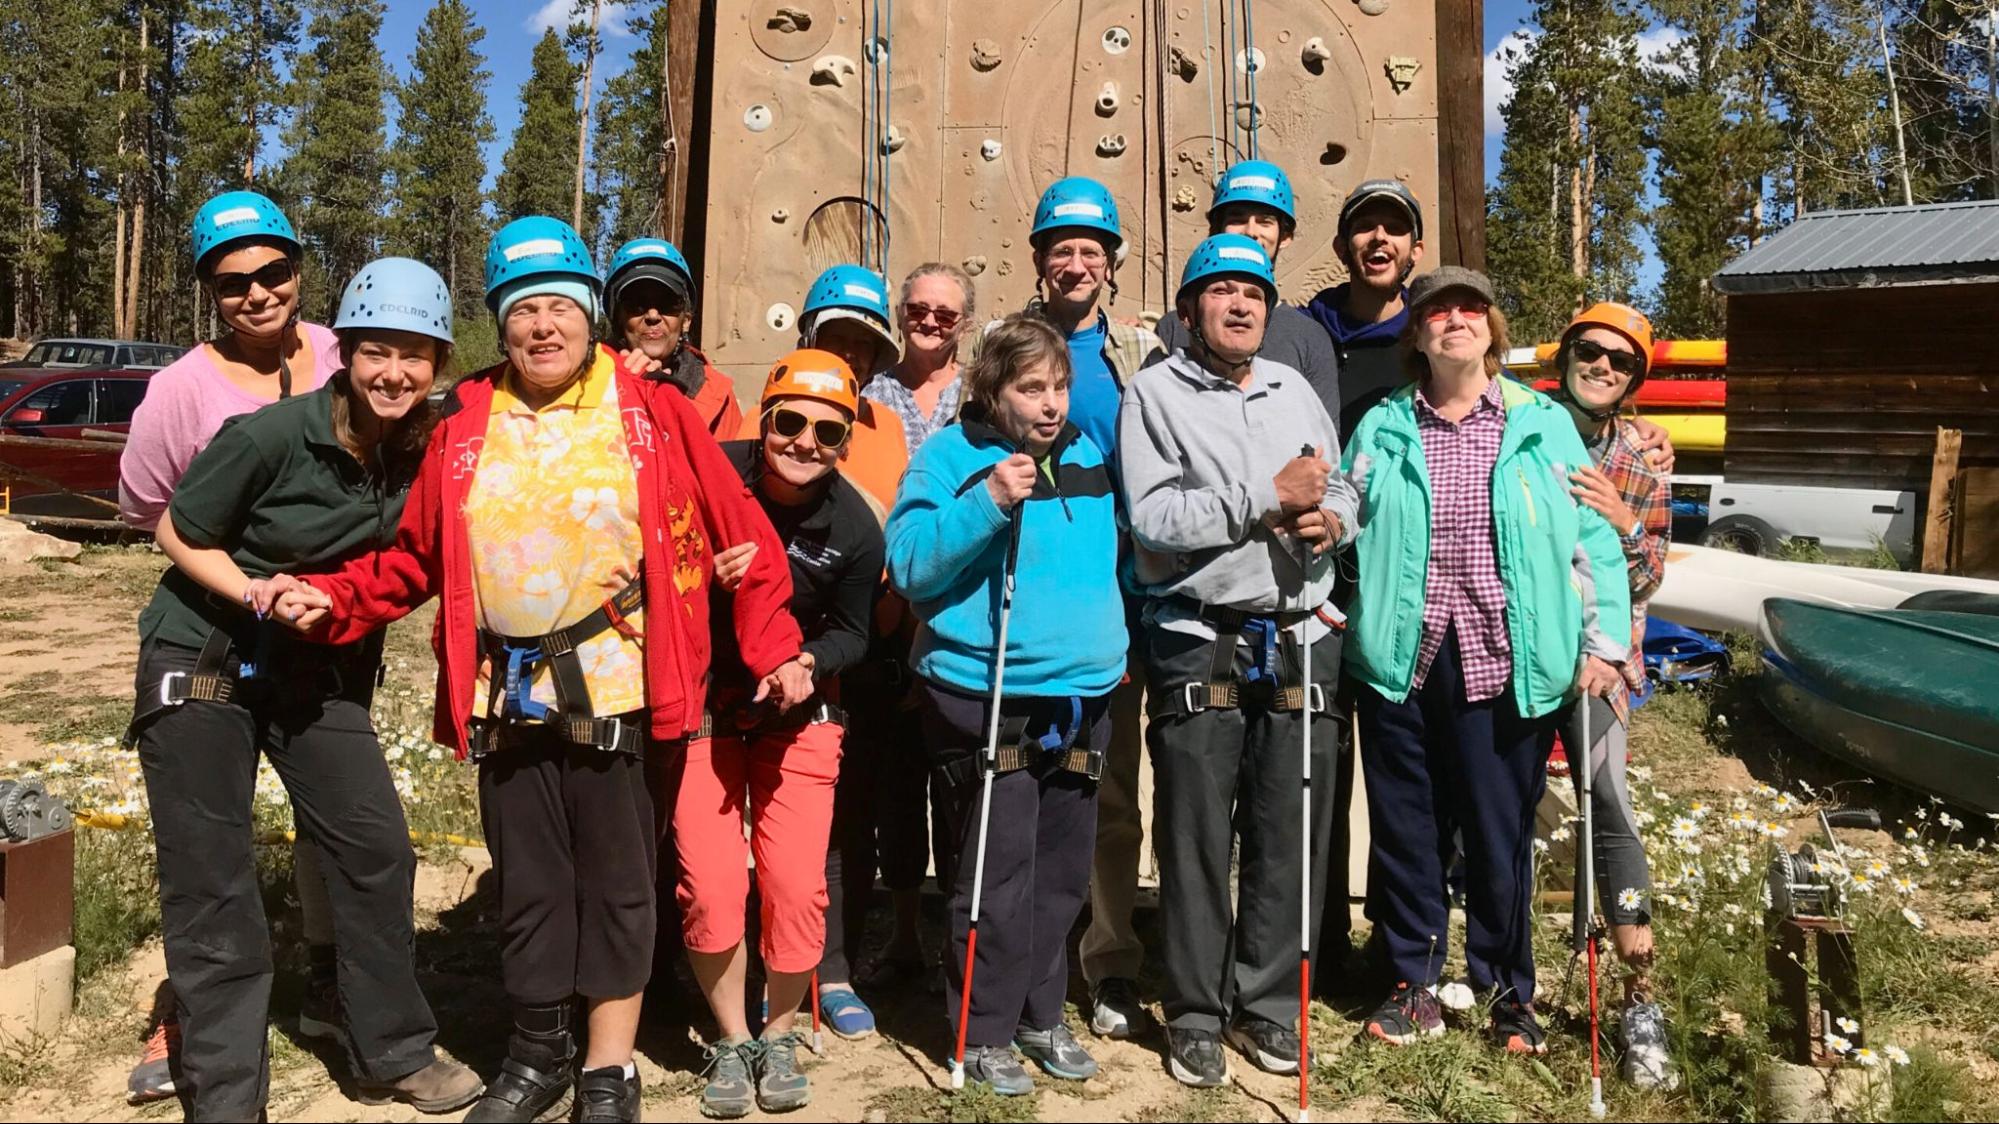 Rob (first back row from the right) and Sarah (first front row from the right in orange) with the Mind’s Eye Travel group enjoying the Colorado outdoors.